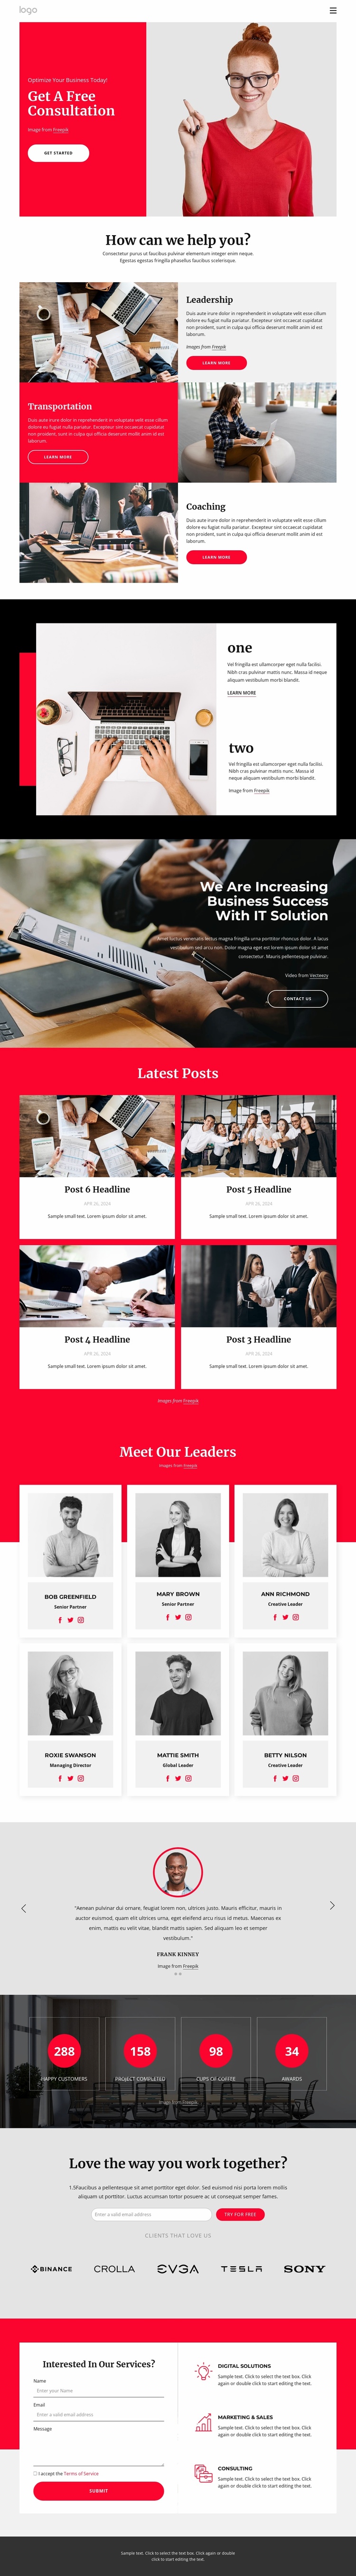 Business coaching and consulting Website Template